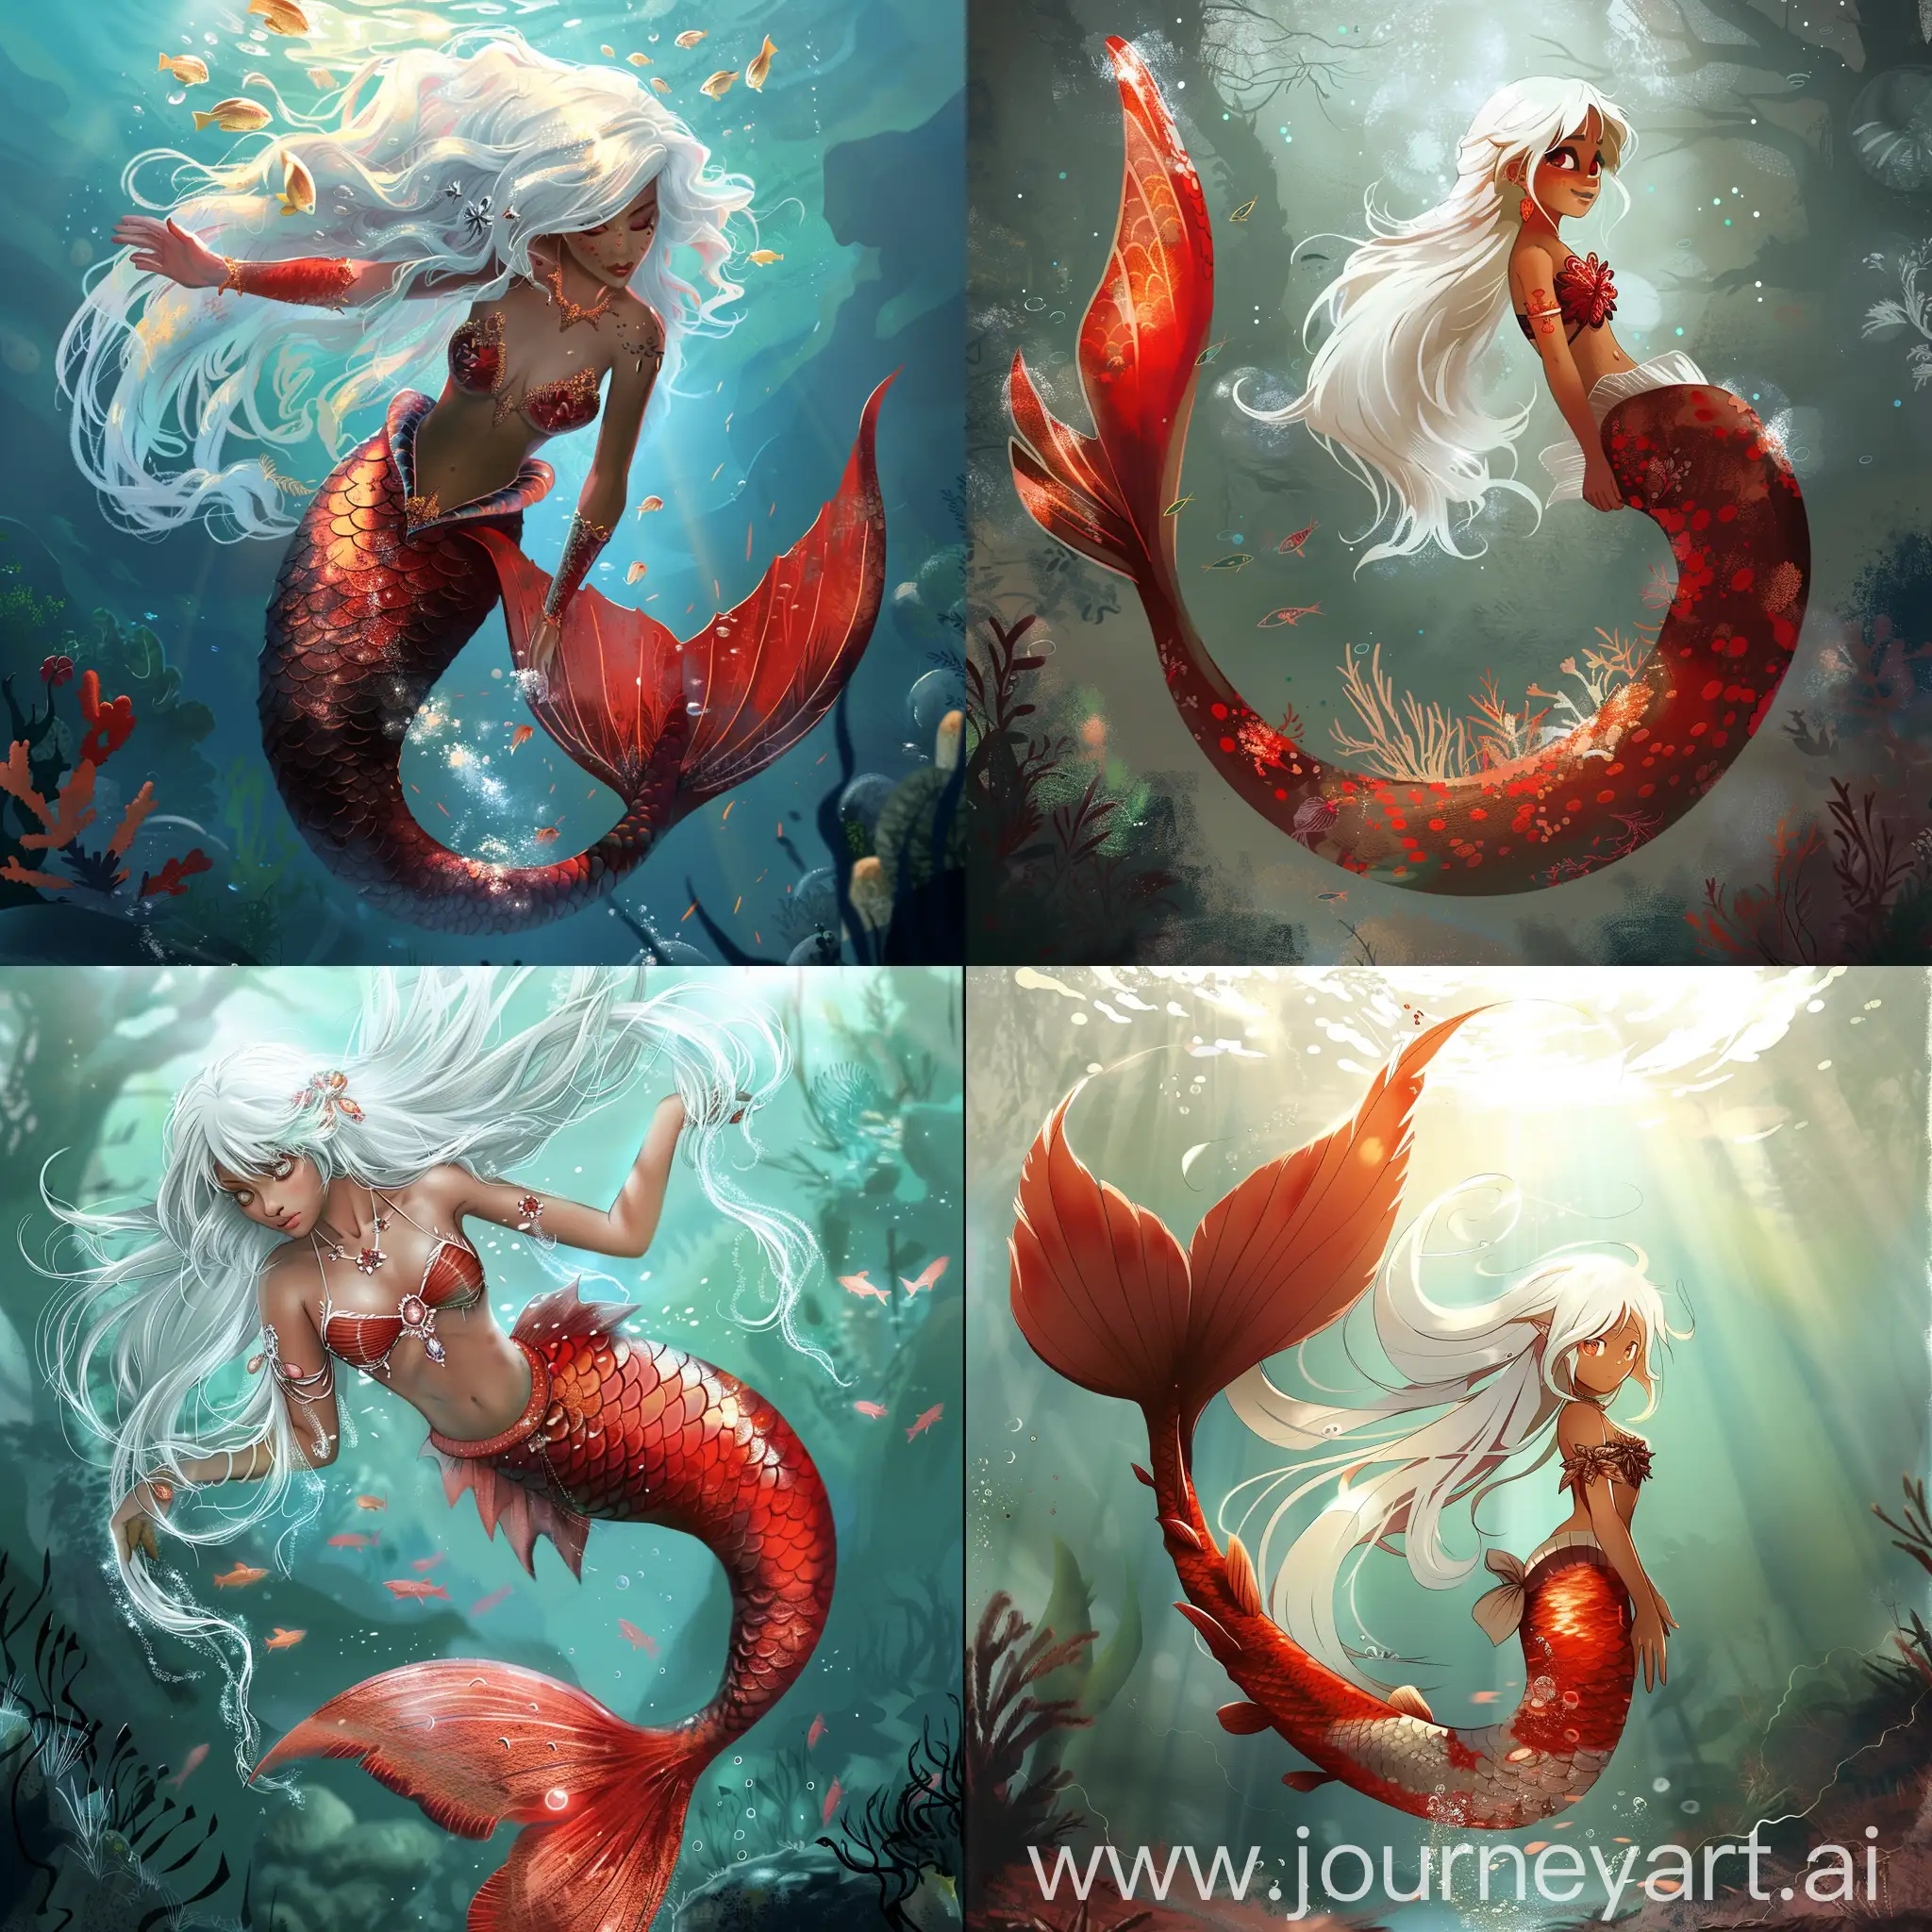 Majestic-WhiteHaired-Mermaid-with-Crimson-Tail